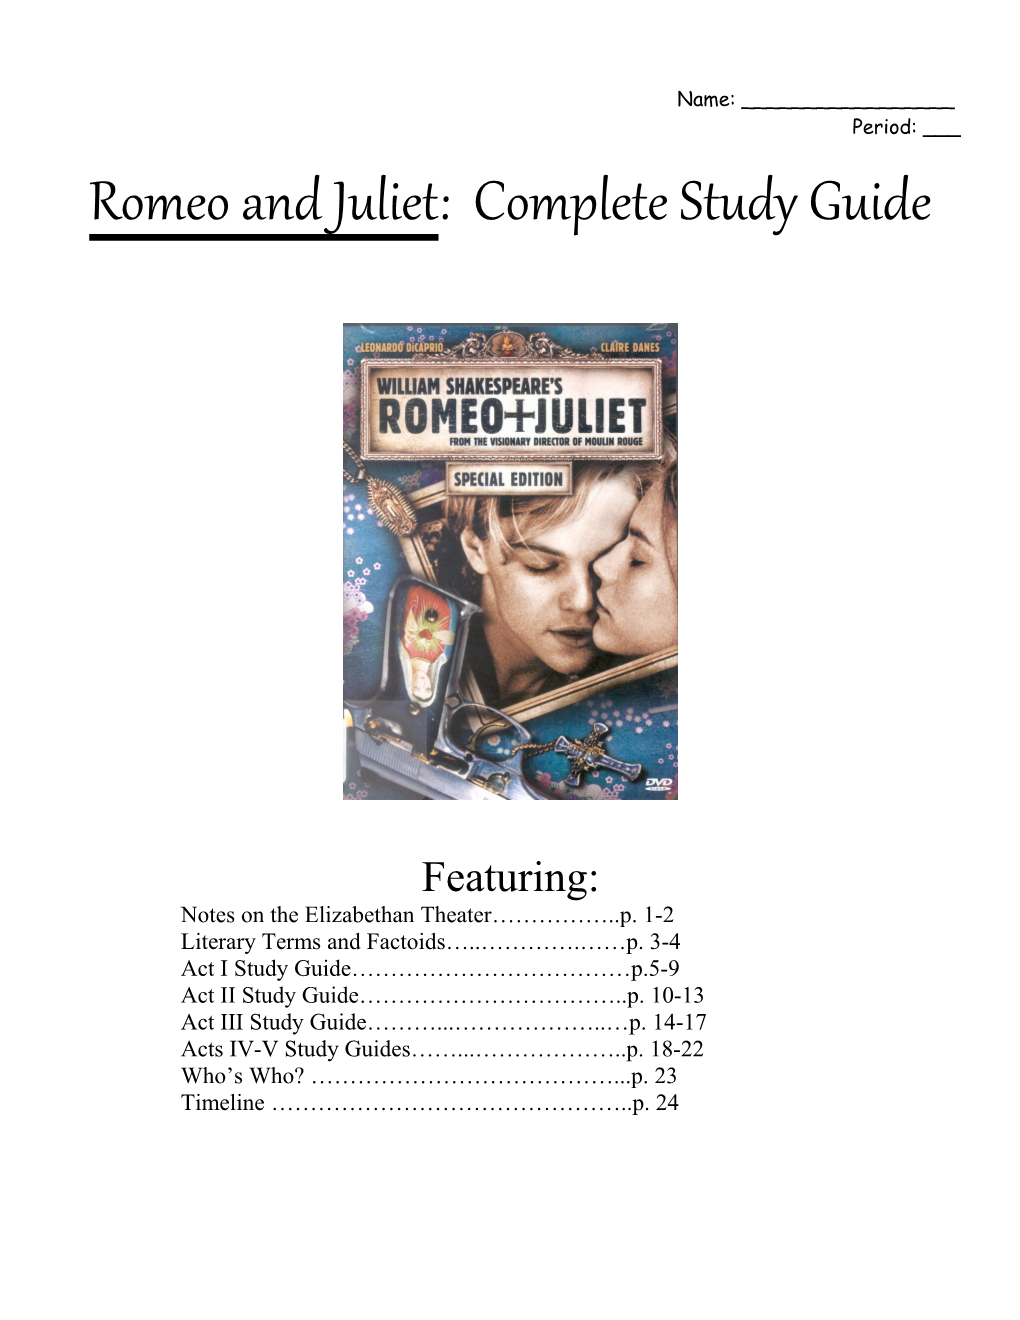 Romeo and Juliet Complete Study Guide